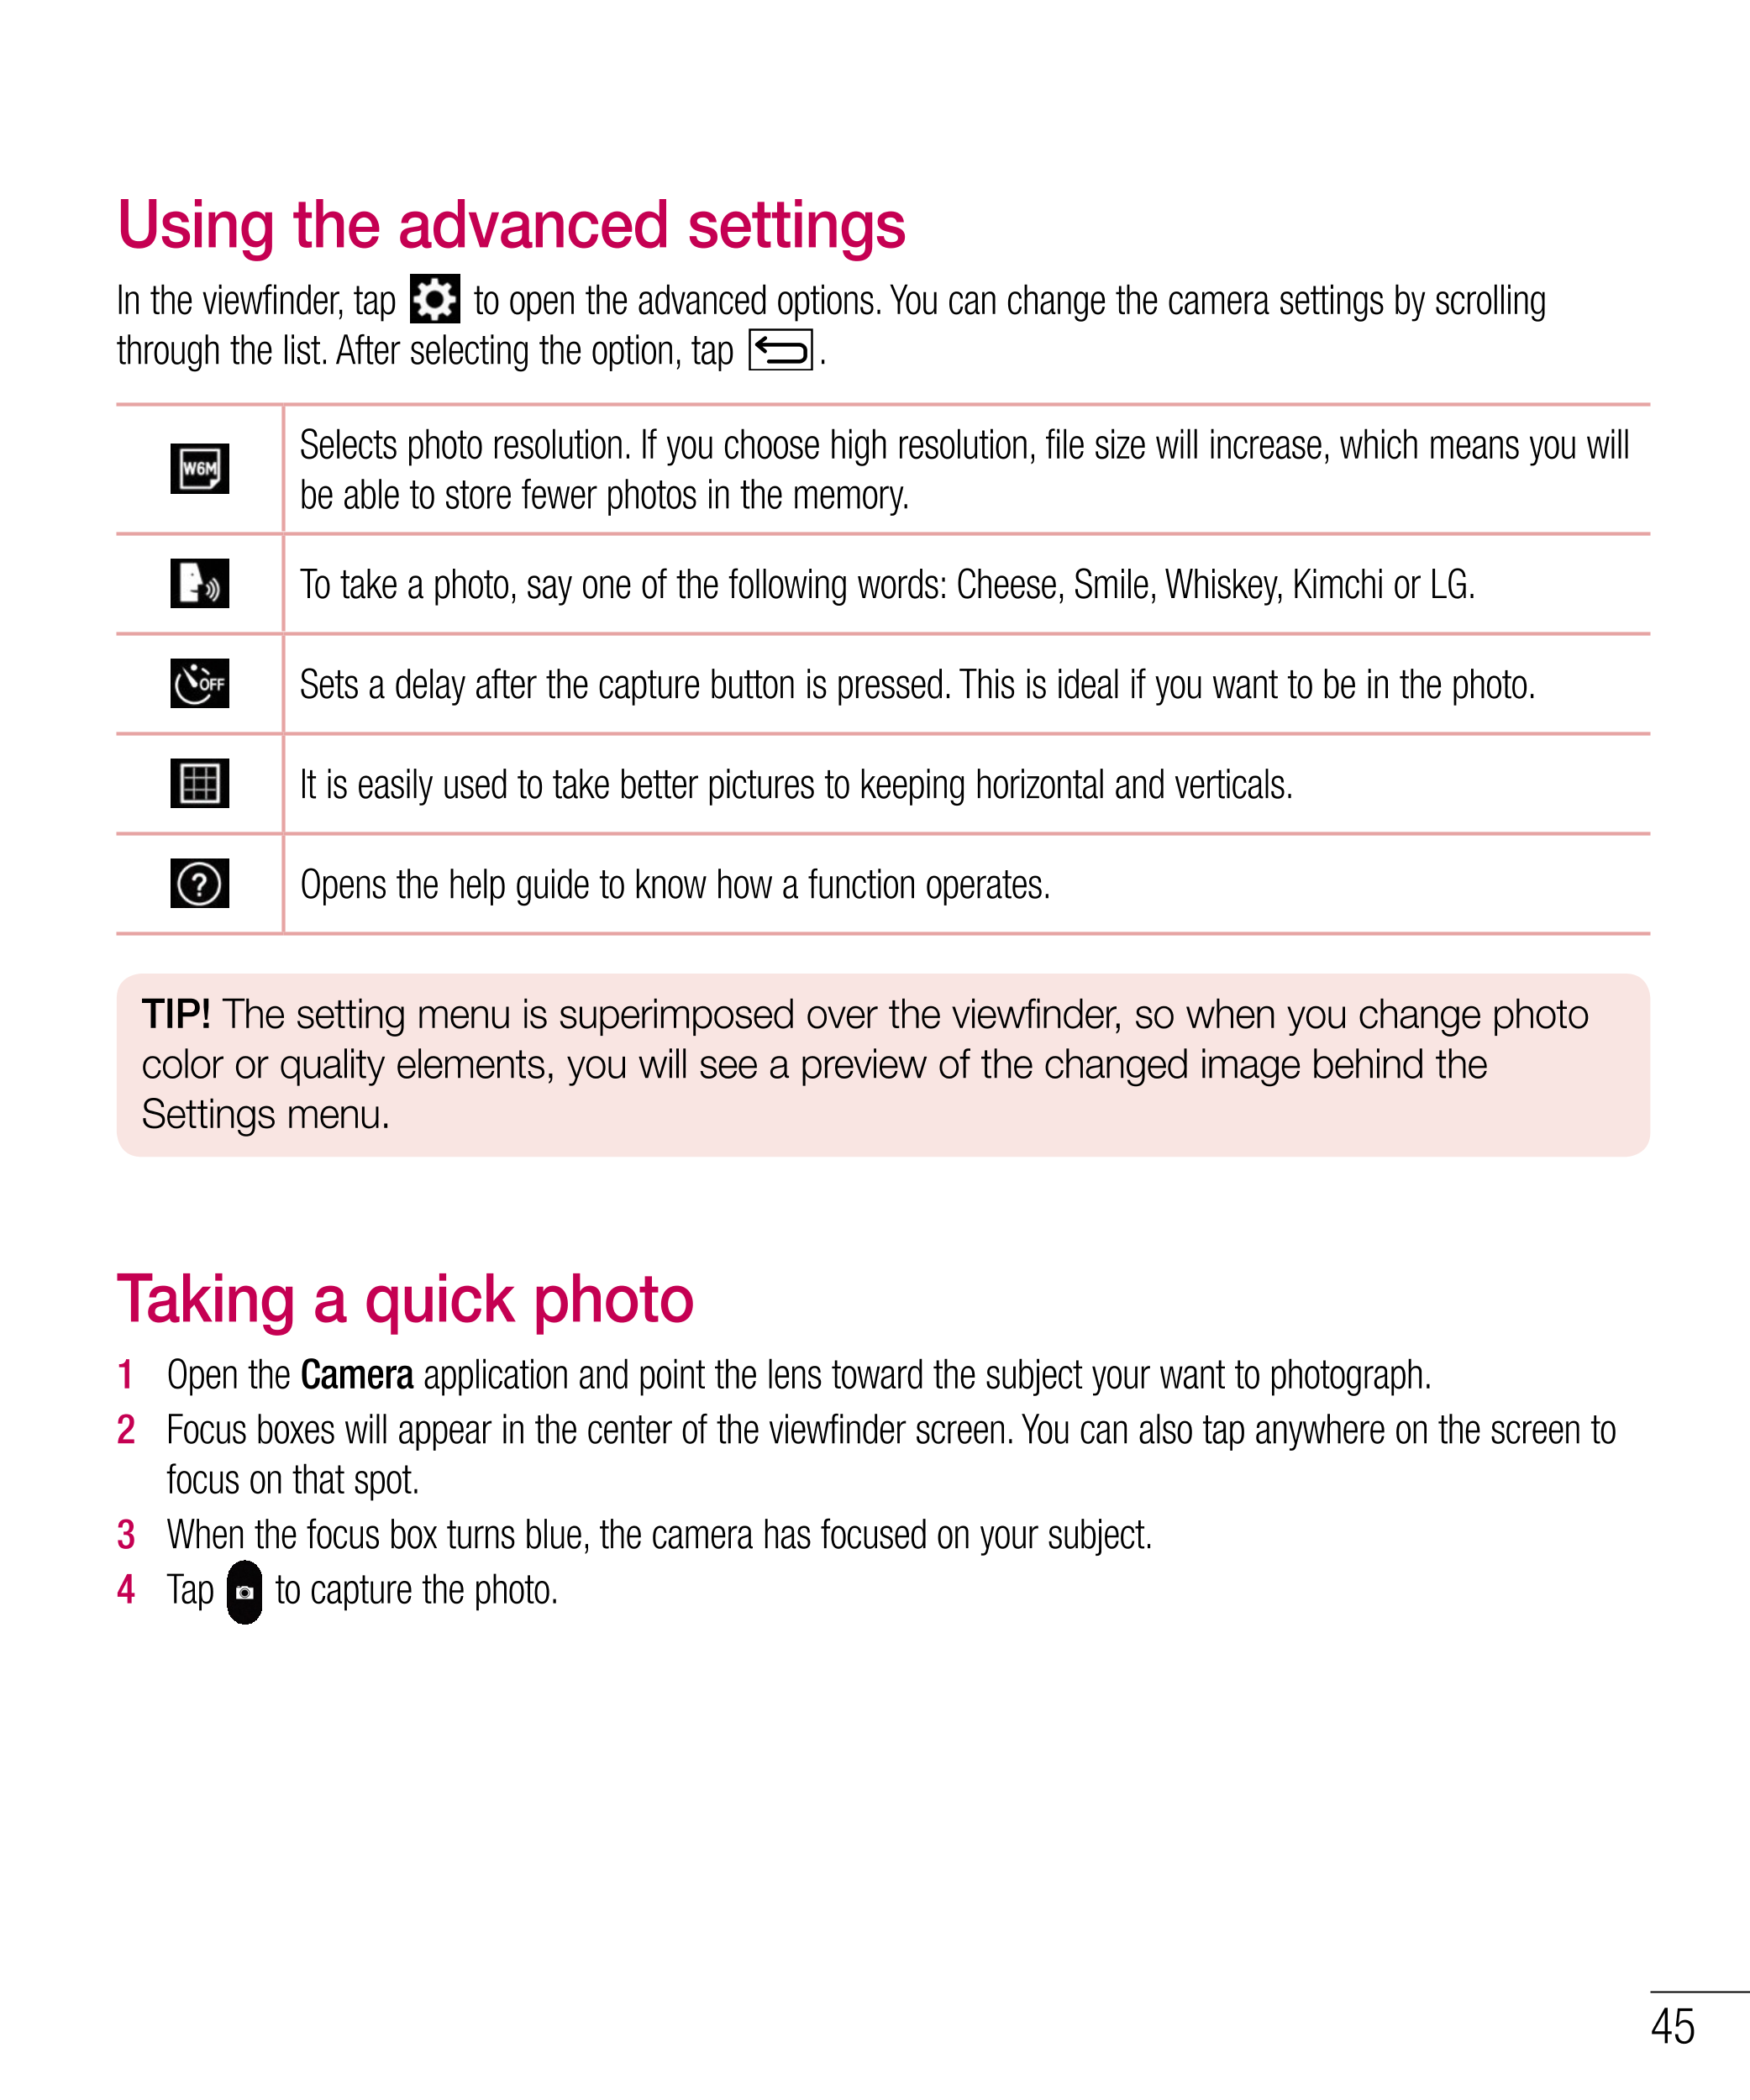 Using the advanced settings
In the viewfinder, tap   to open the advanced options. You can change the camera settings by scrolli